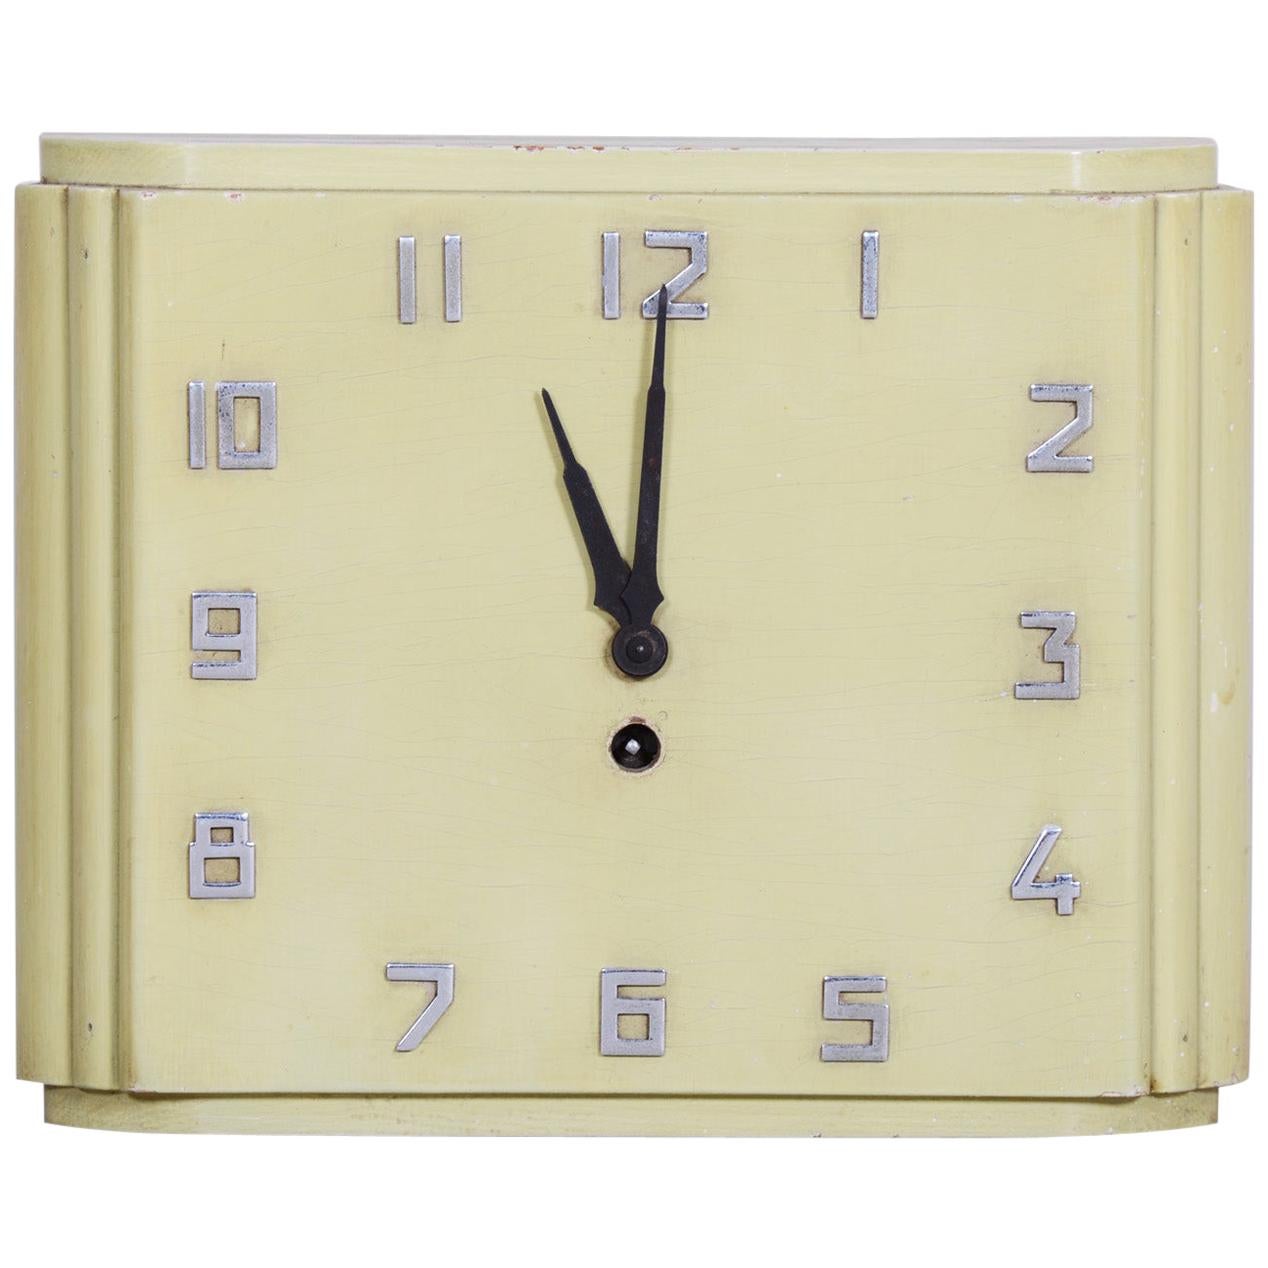 Unusual Czech Midcentury Bauhaus Wall Clock, Lacquered Wood, 1930s